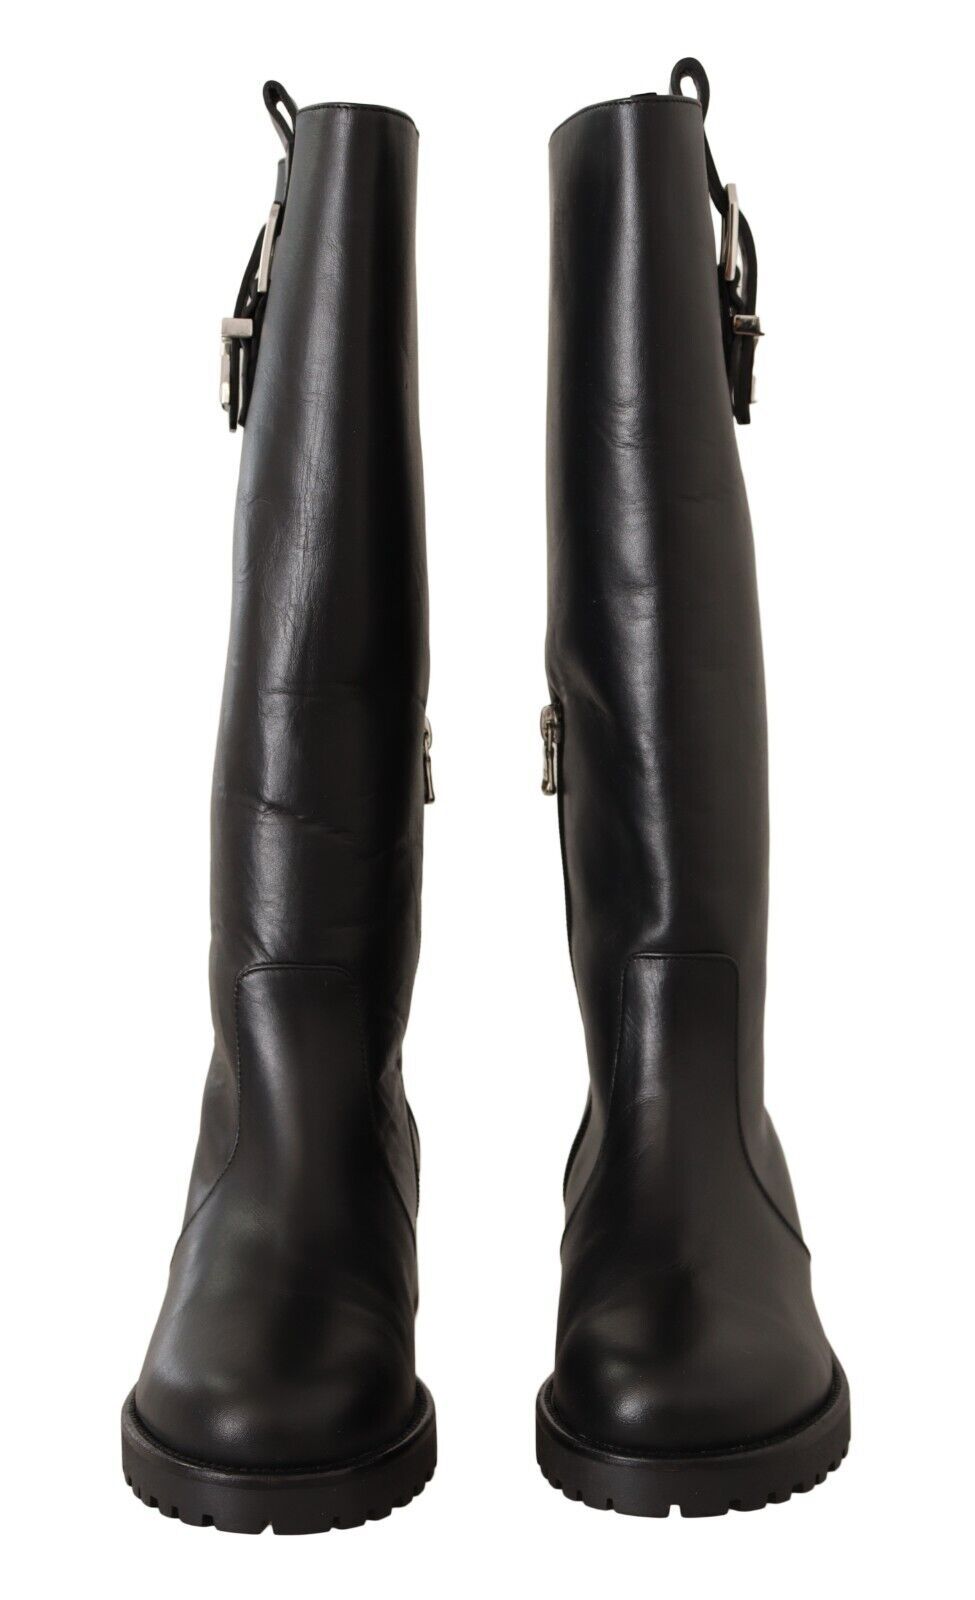 Elegant Leather High Boots for High Fashion Appeal